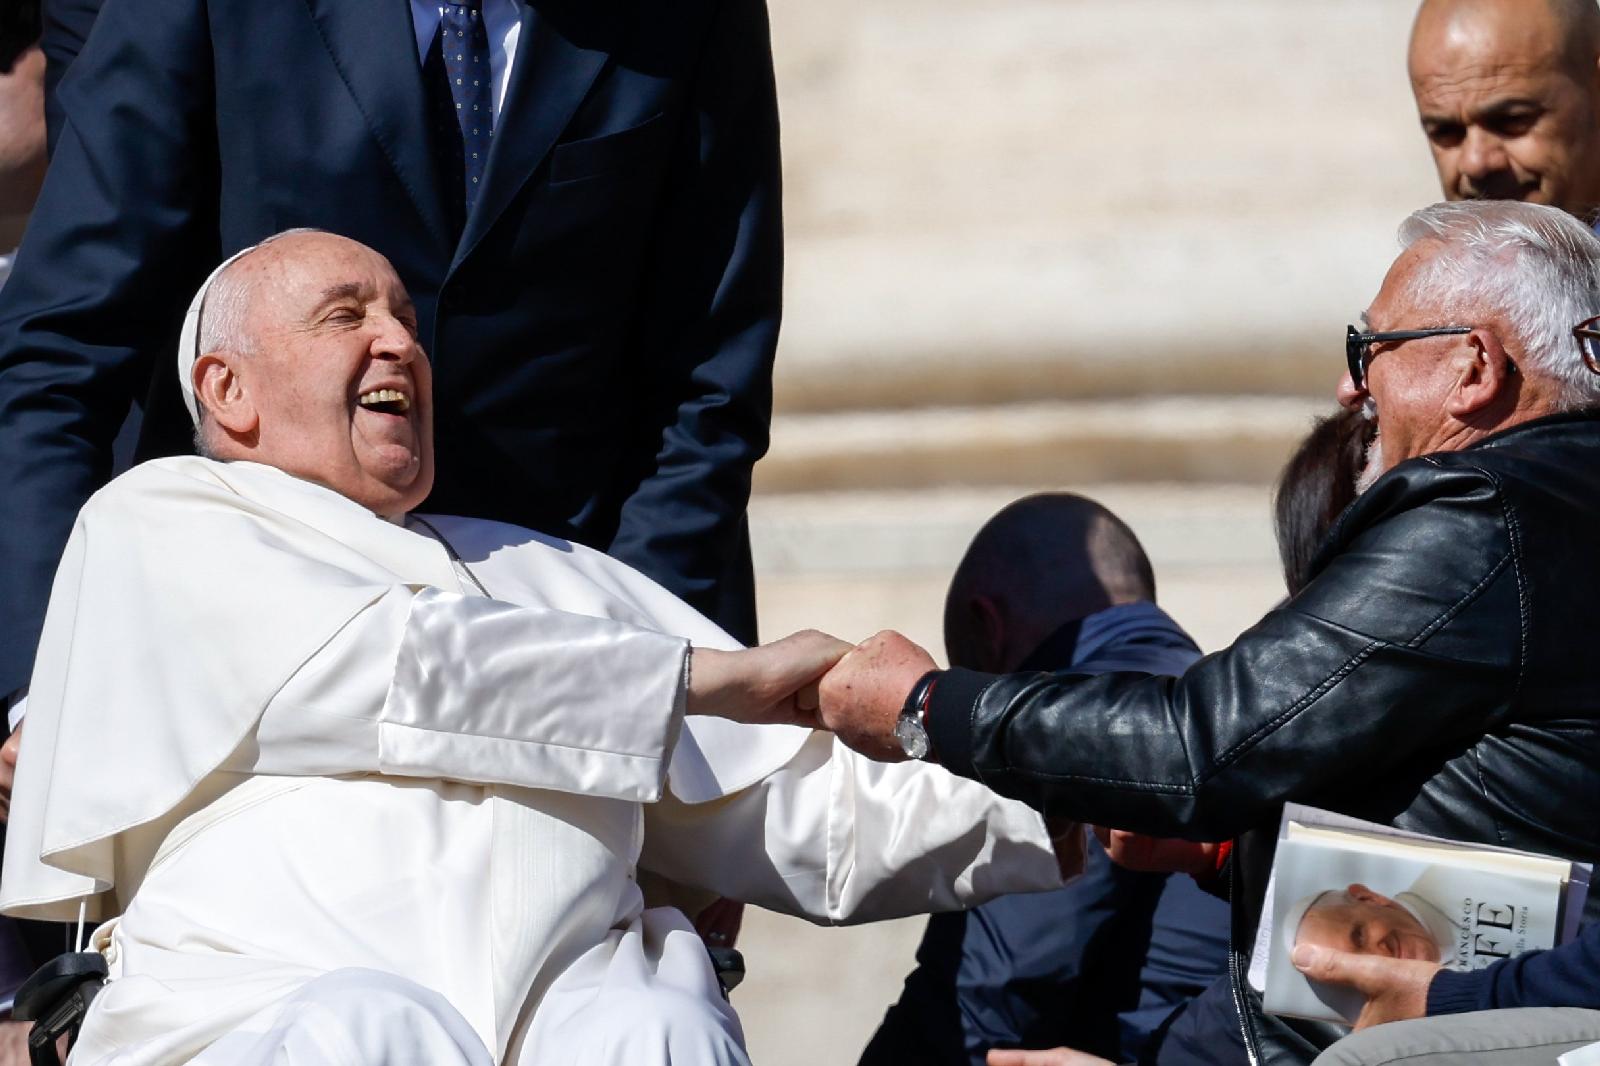 Pope Francis laughs with a visitor